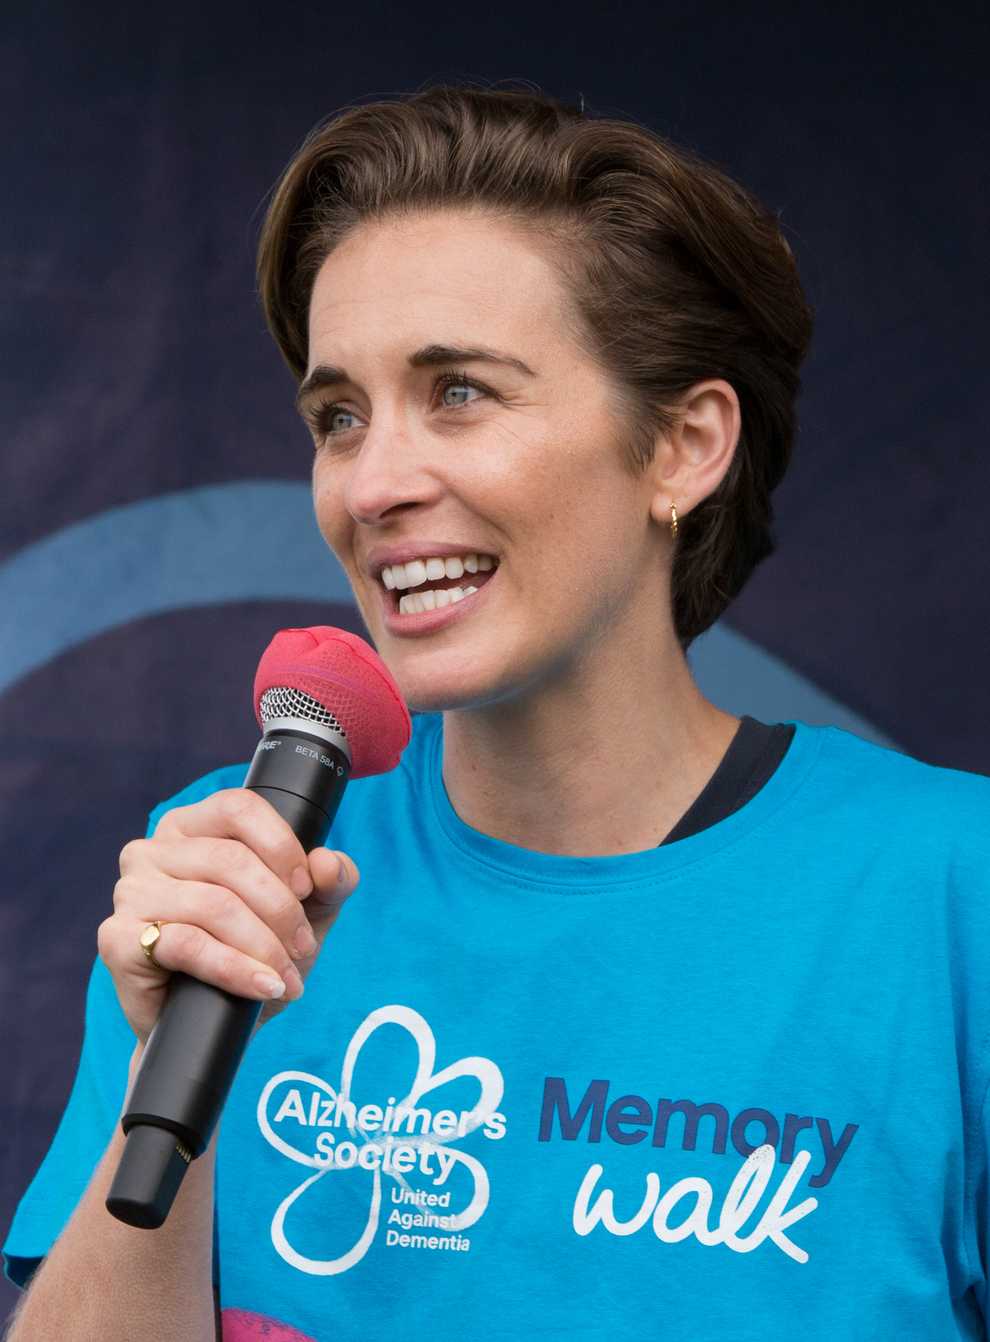 Line Of Duty star Vicky McClure speaks to fellow walkers during the Memory Walk at Wollaton Park in Nottingham last year (Alzheimer’s Society/PA)